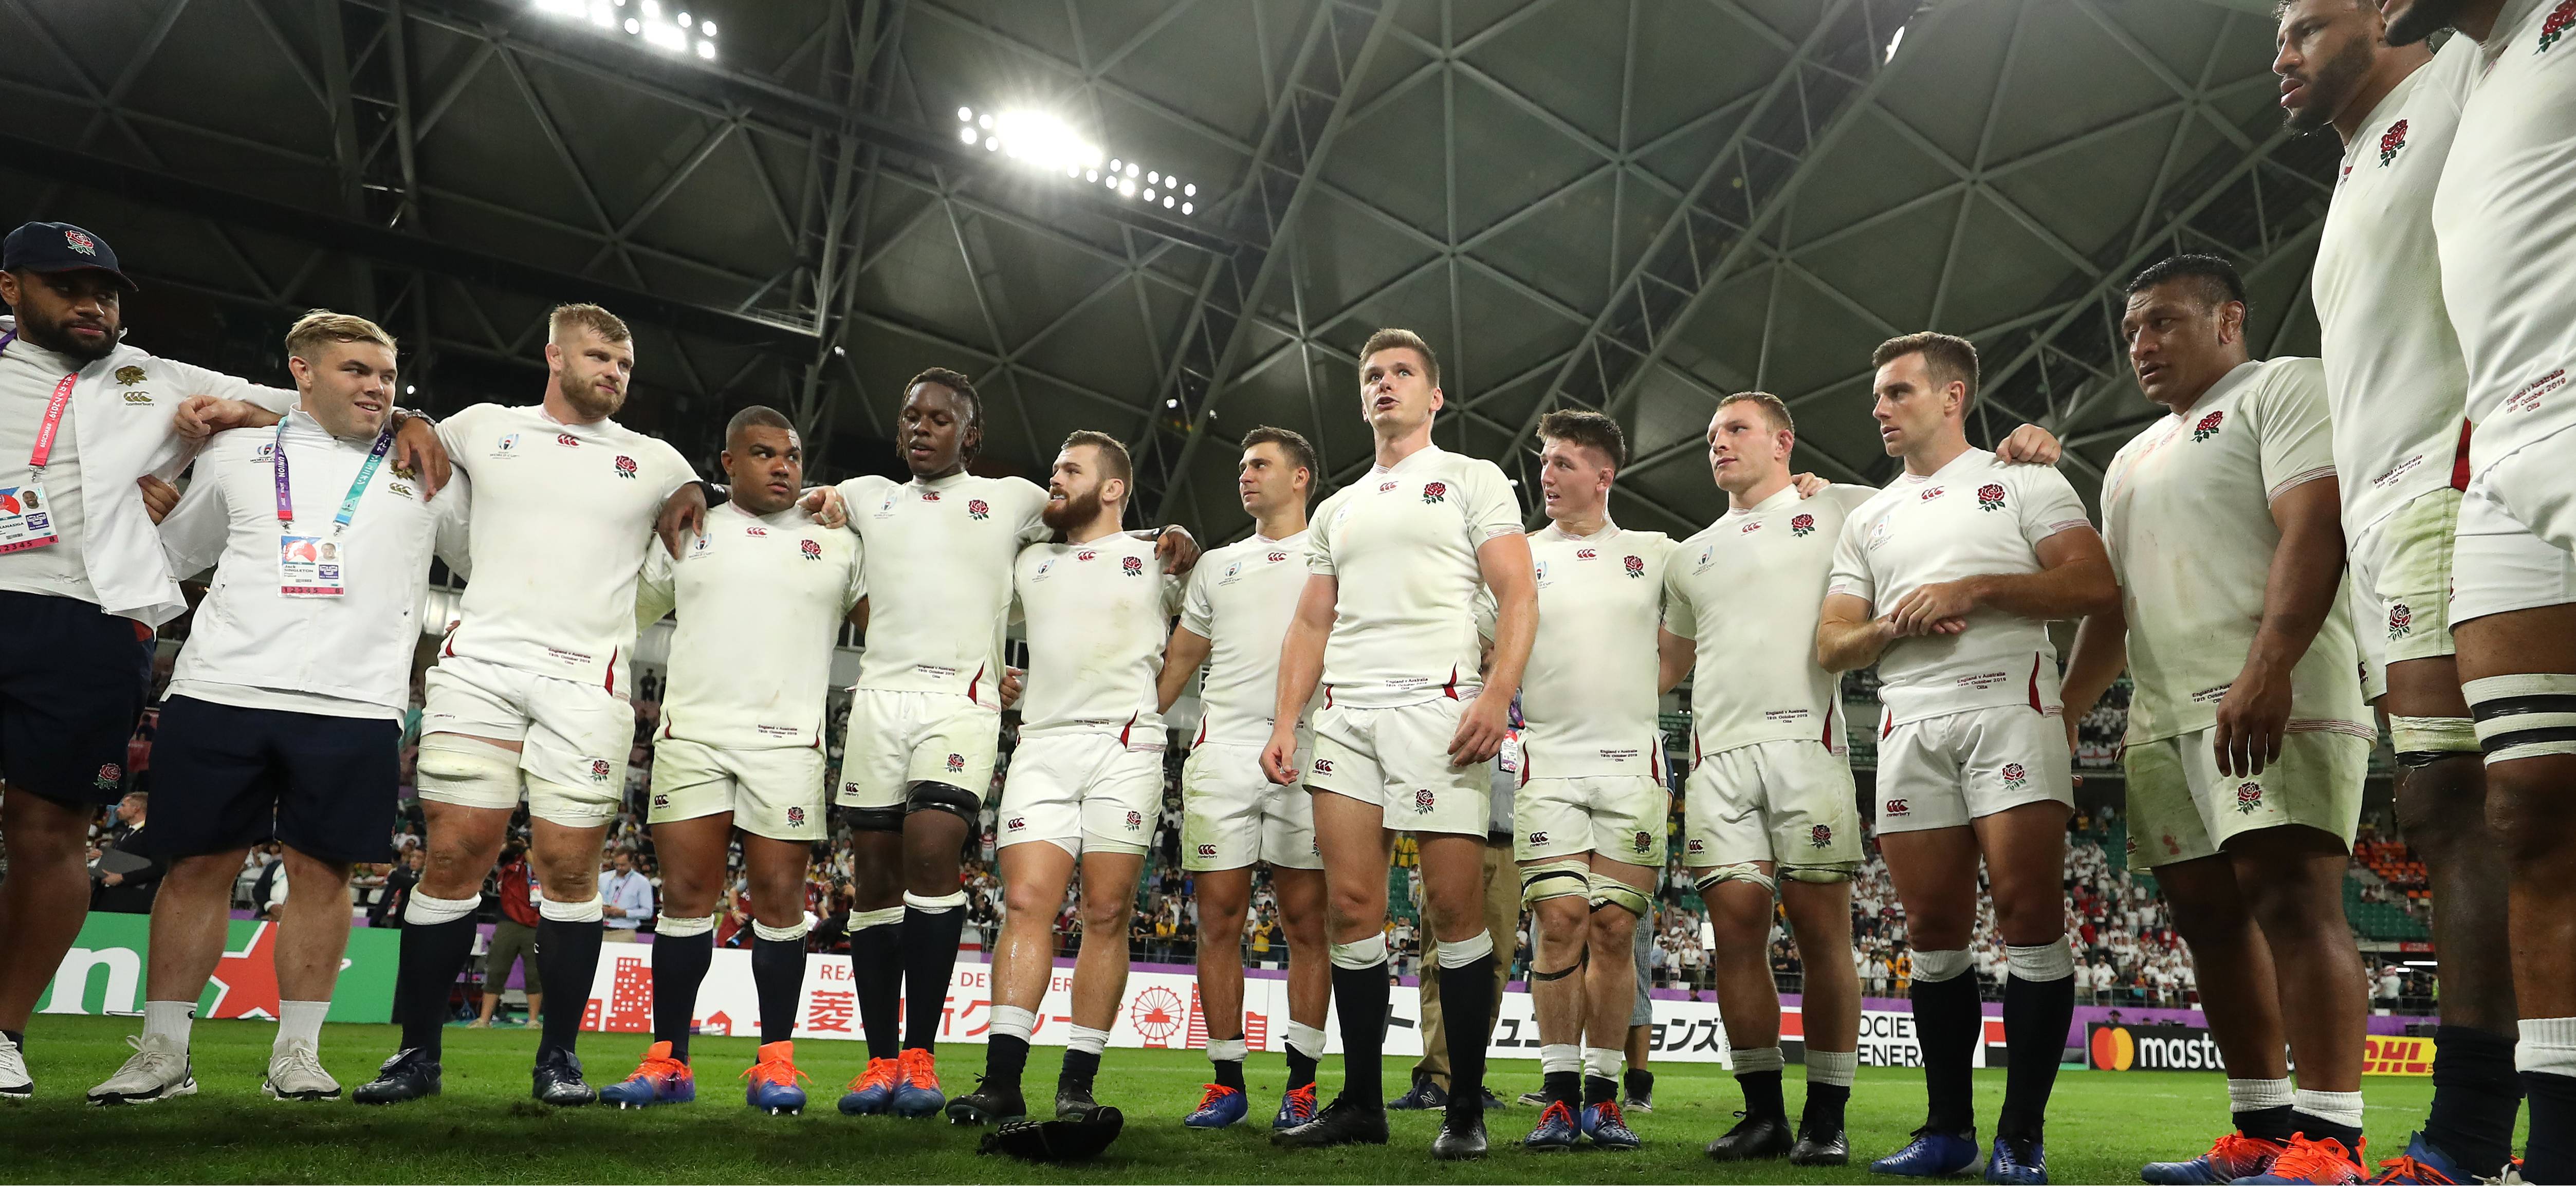 england rugby team